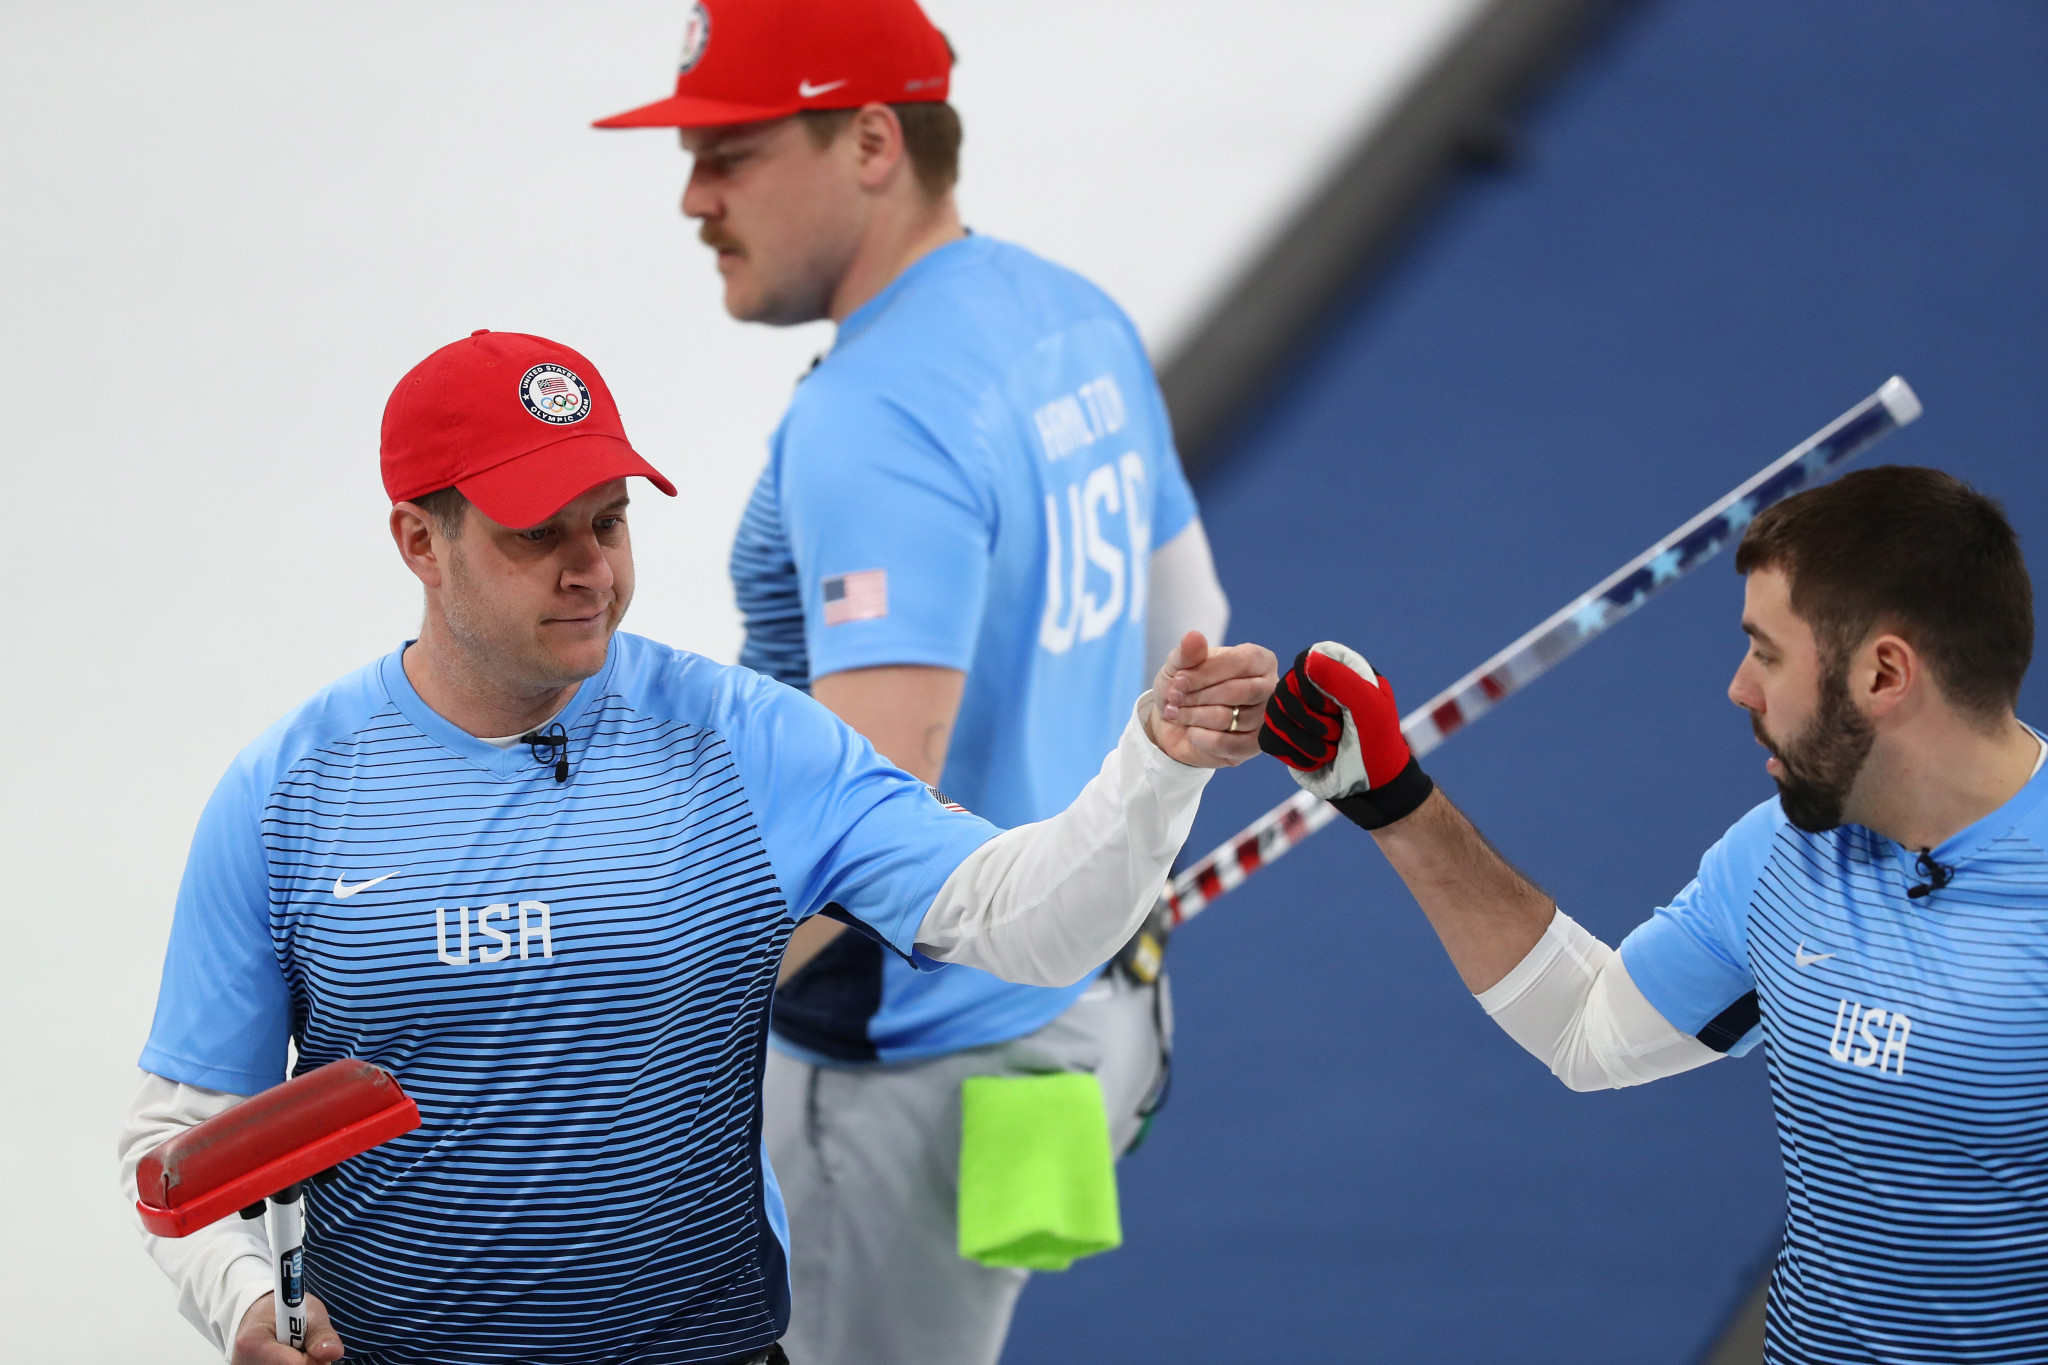 John Shuster's American rink were the surprise Olympic gold medallists at Pyeongchang 2018 after being written off by everyone ©Getty Images